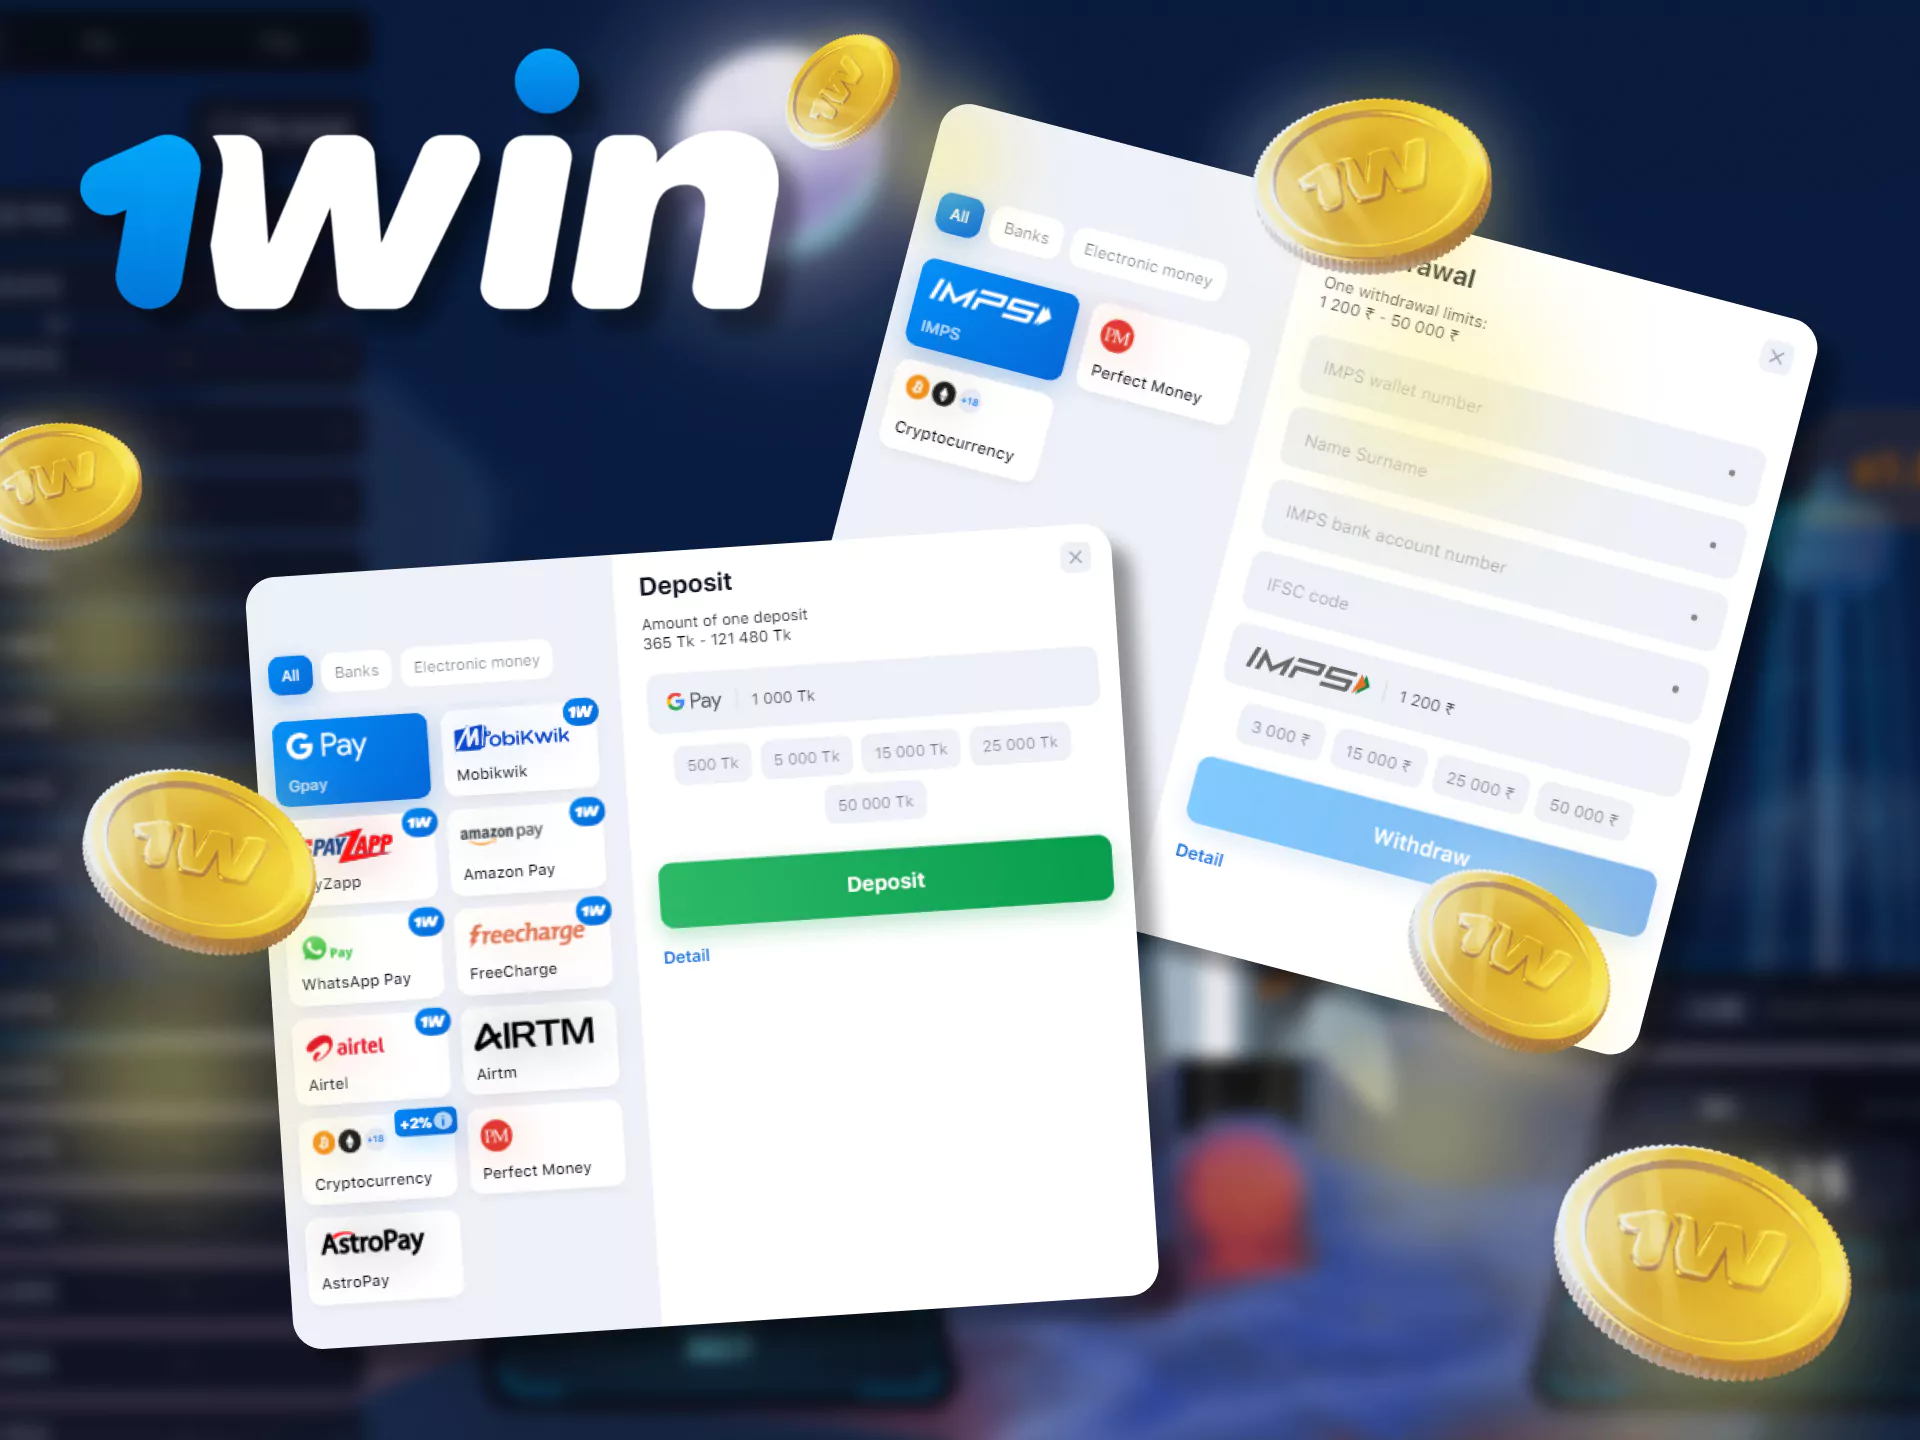 Find out how easy it is to withdraw money and deposit your account balance at 1win.